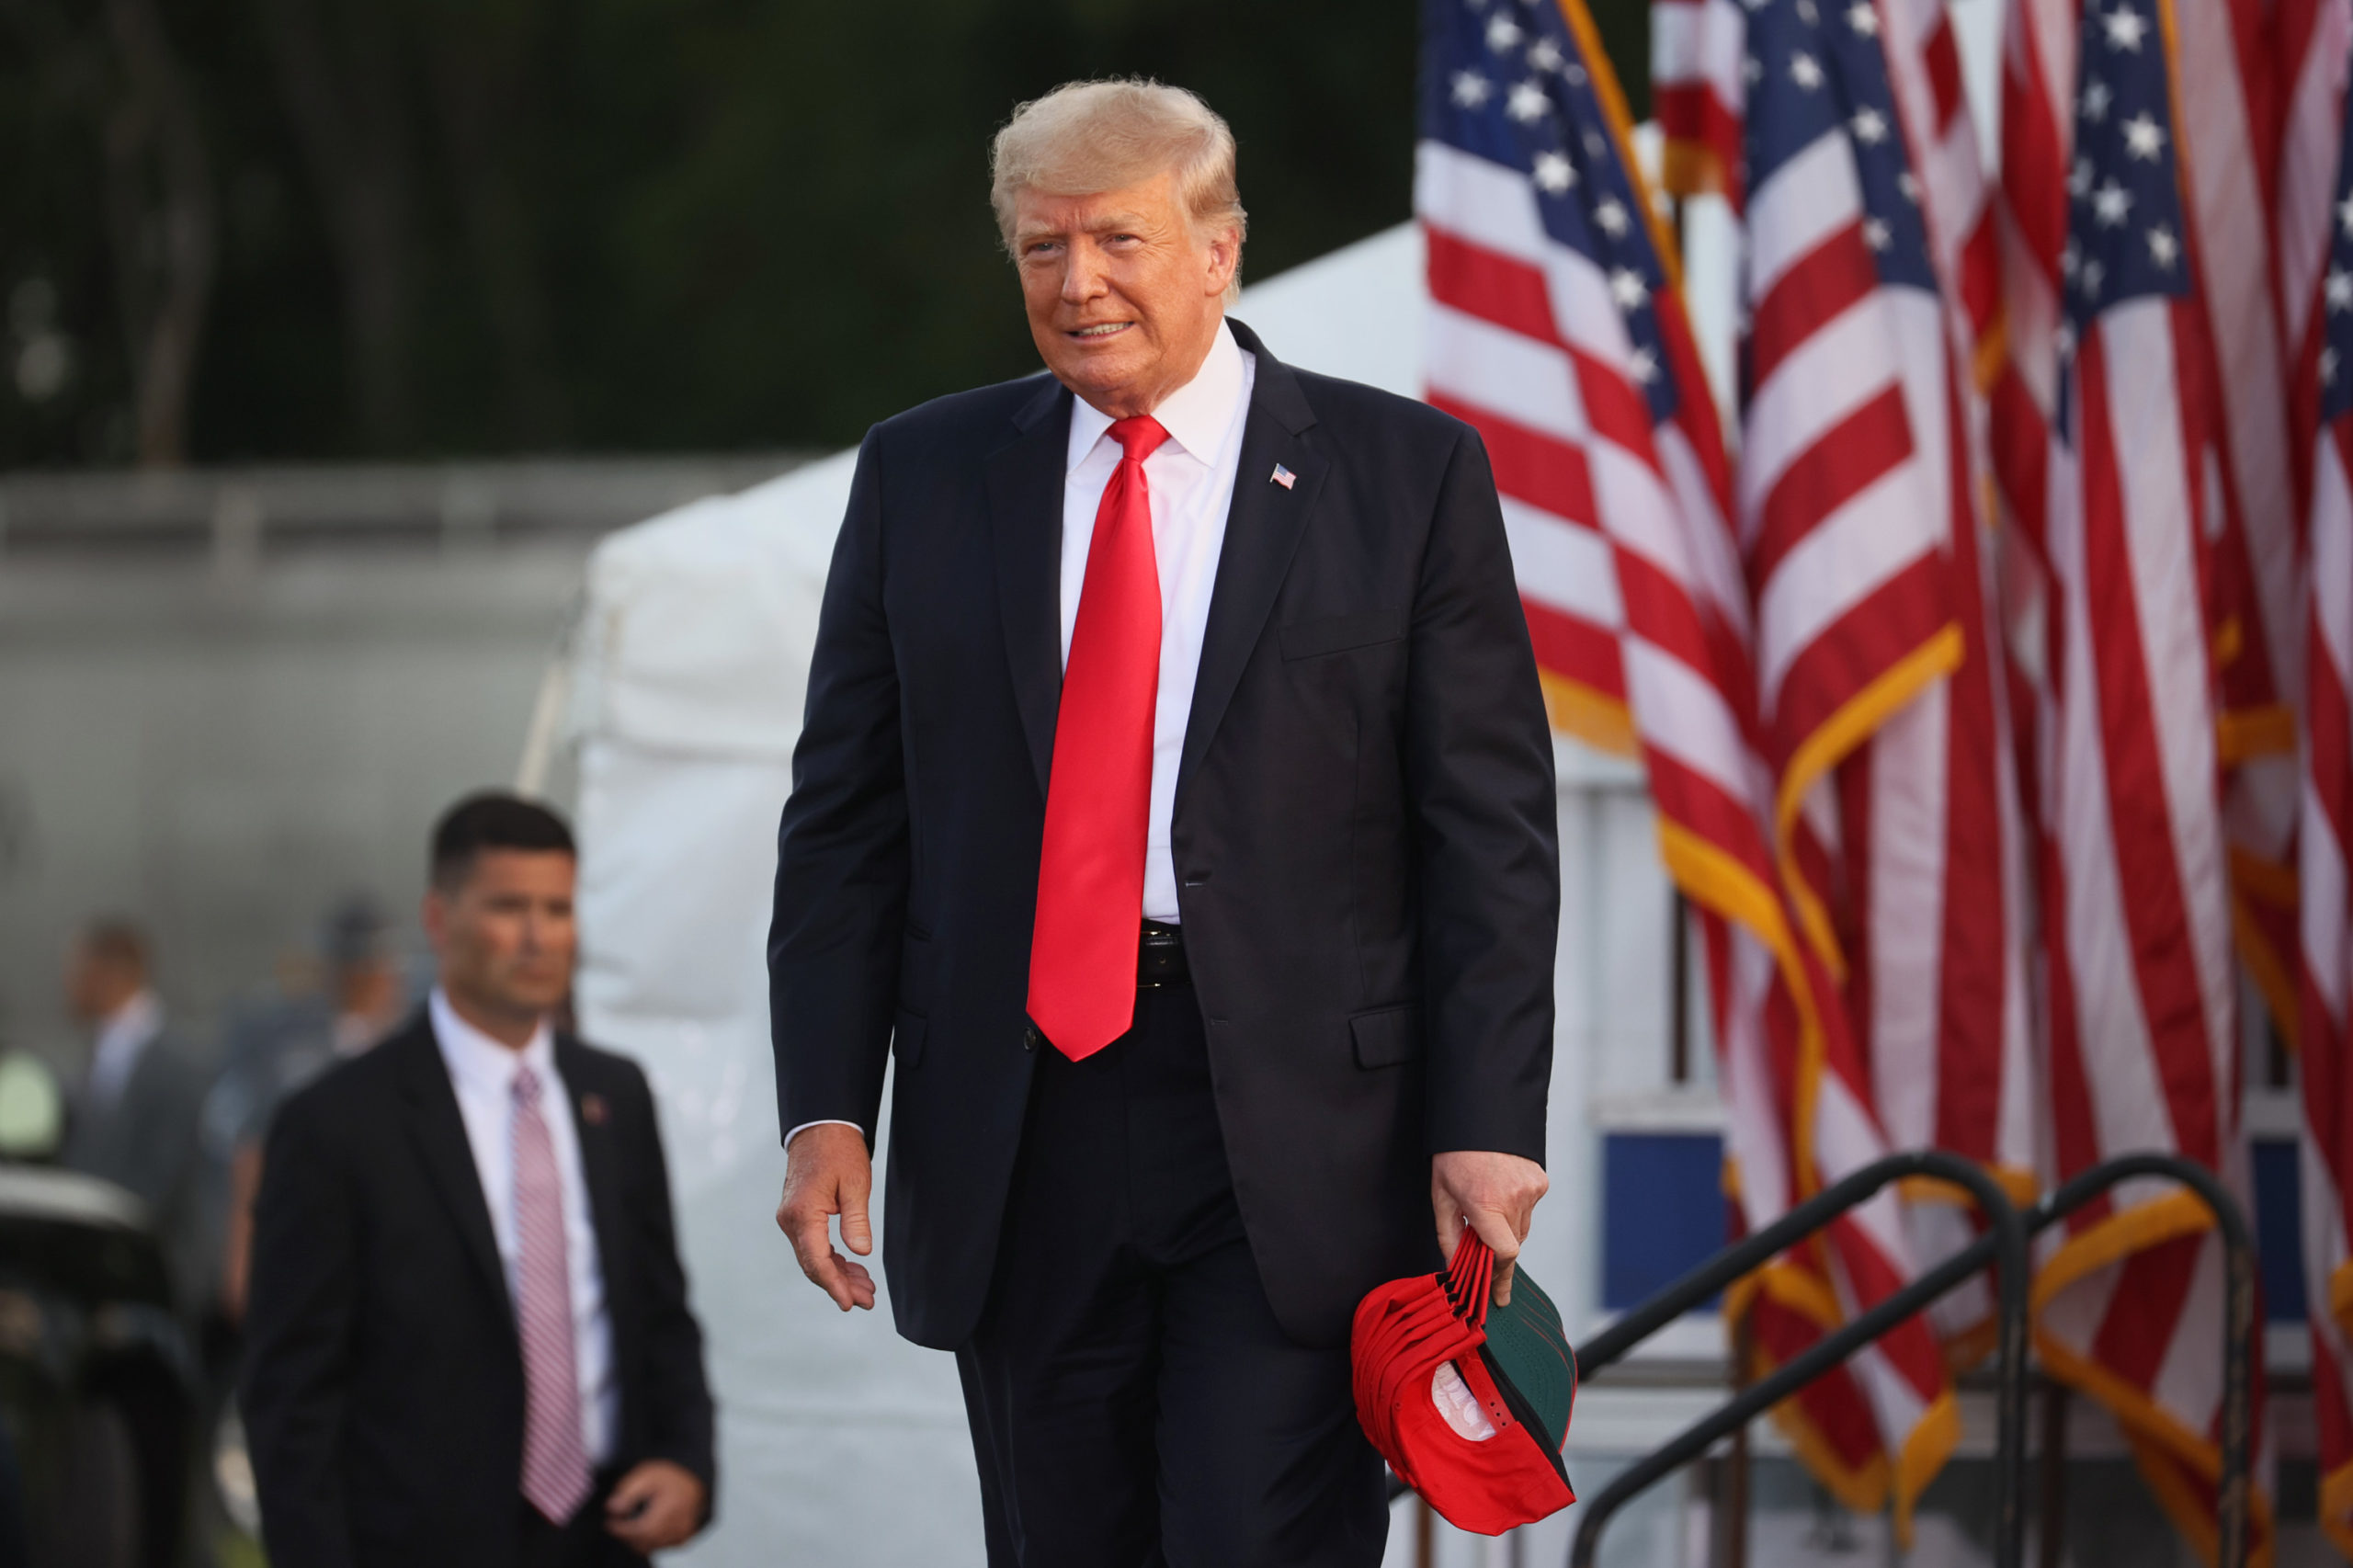 WELLINGTON, OHIO - JUNE 26: Former US President Donald Trump arrives for a rally at the Lorain County Fairgrounds on June 26, 2021 in Wellington, Ohio. Trump is in Ohio to campaign for his former White House advisor Max Miller. Miller is challenging incumbent Rep. Anthony Gonzales in the 16th congressional district GOP primary. This is Trump's first rally since leaving office. (Photo by Scott Olson/Getty Images)WELLINGTON, OHIO - JUNE 26: Former US President Donald Trump arrives for a rally at the Lorain County Fairgrounds on June 26, 2021 in Wellington, Ohio. Trump is in Ohio to campaign for his former White House advisor Max Miller. Miller is challenging incumbent Rep. Anthony Gonzales in the 16th congressional district GOP primary. This is Trump's first rally since leaving office. (Photo by Scott Olson/Getty Images)